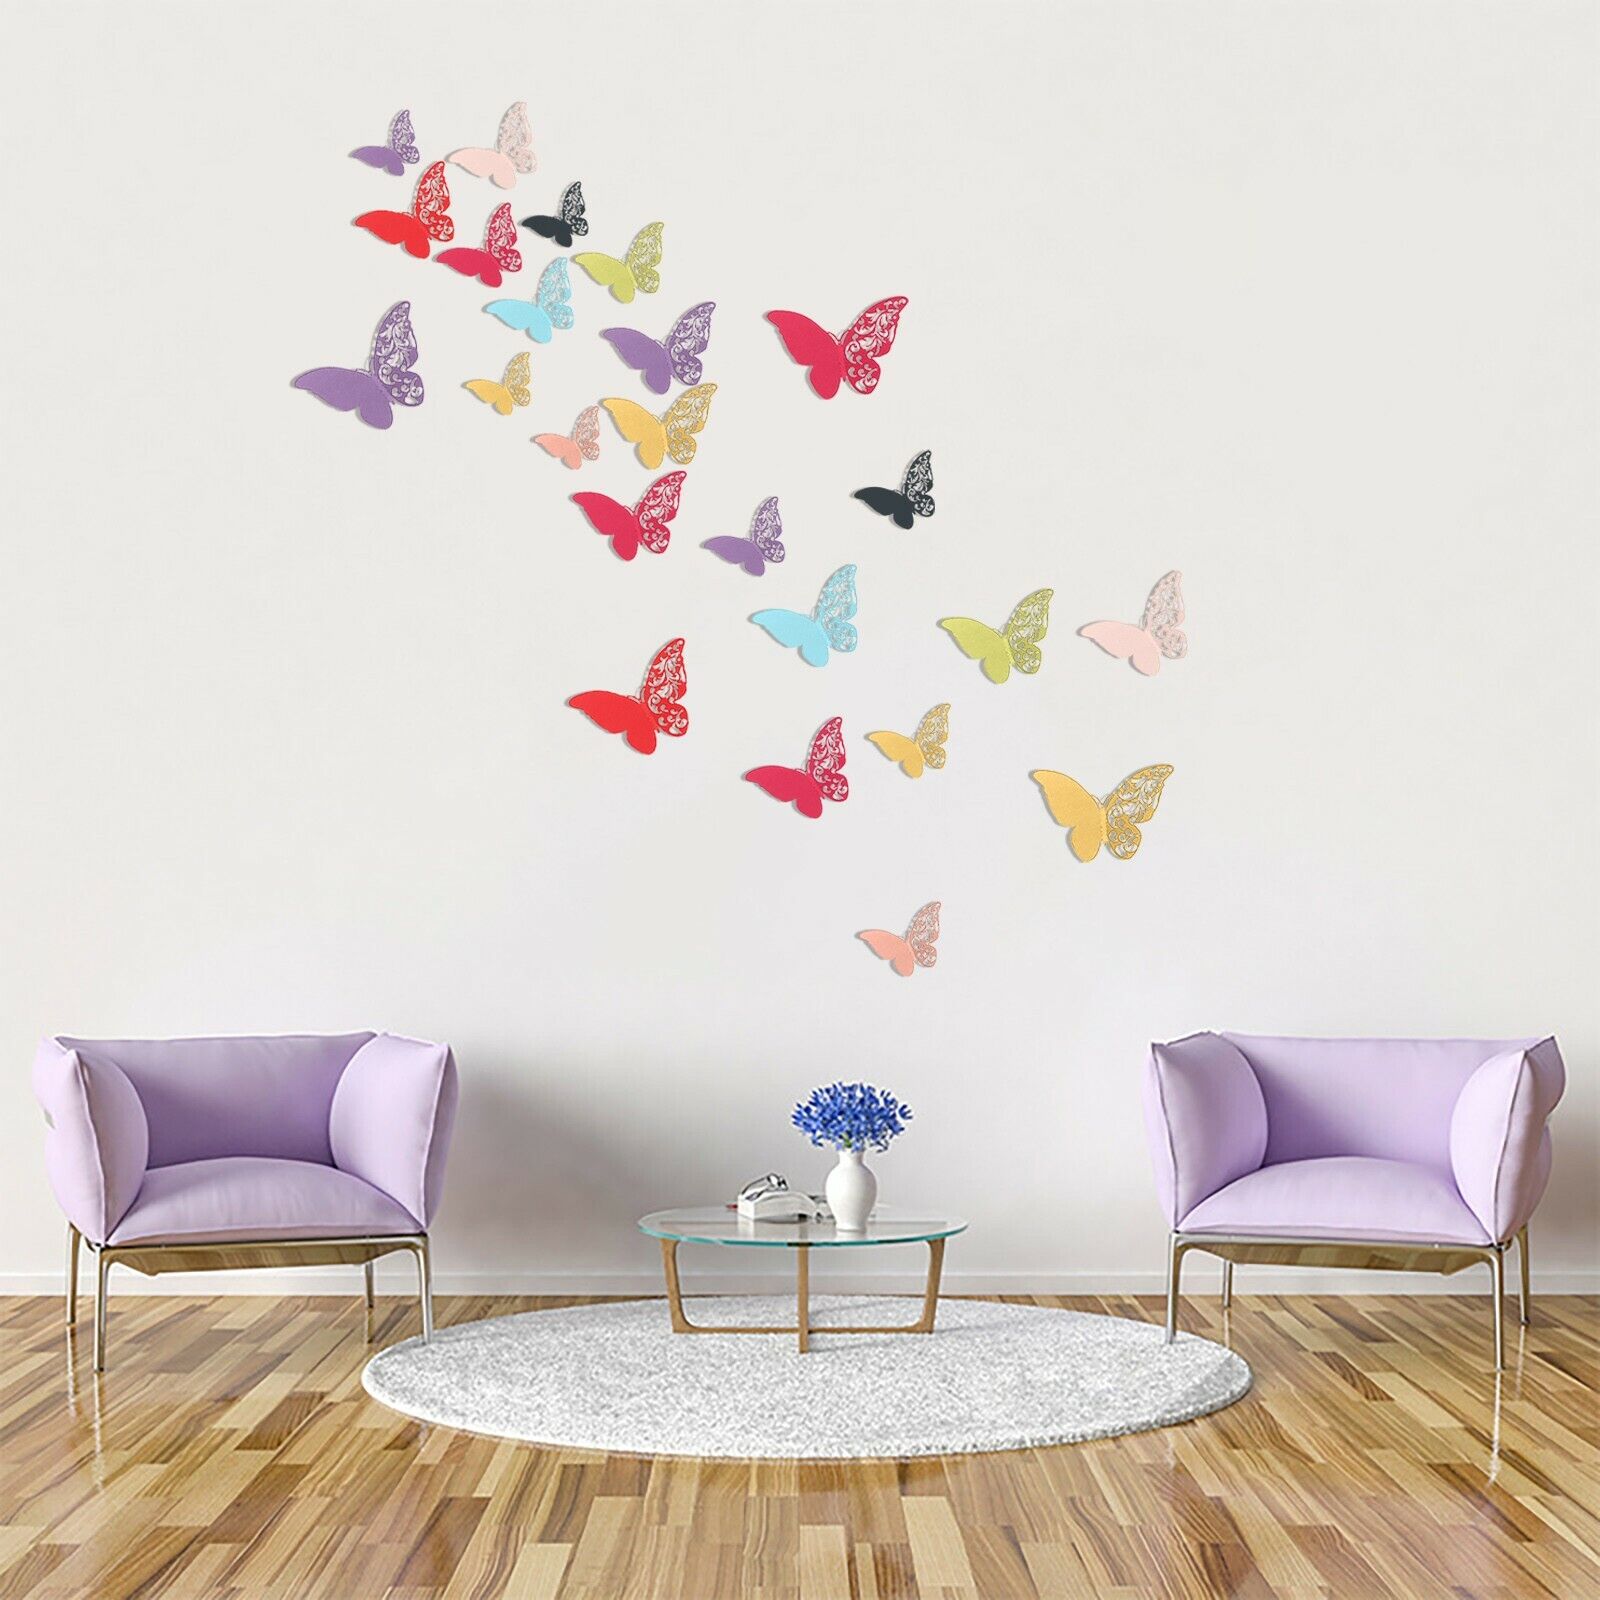 12PCS 3D DIY Wall Decal Stickers Butterfly Home Room Art Decor Decorations  | eBay